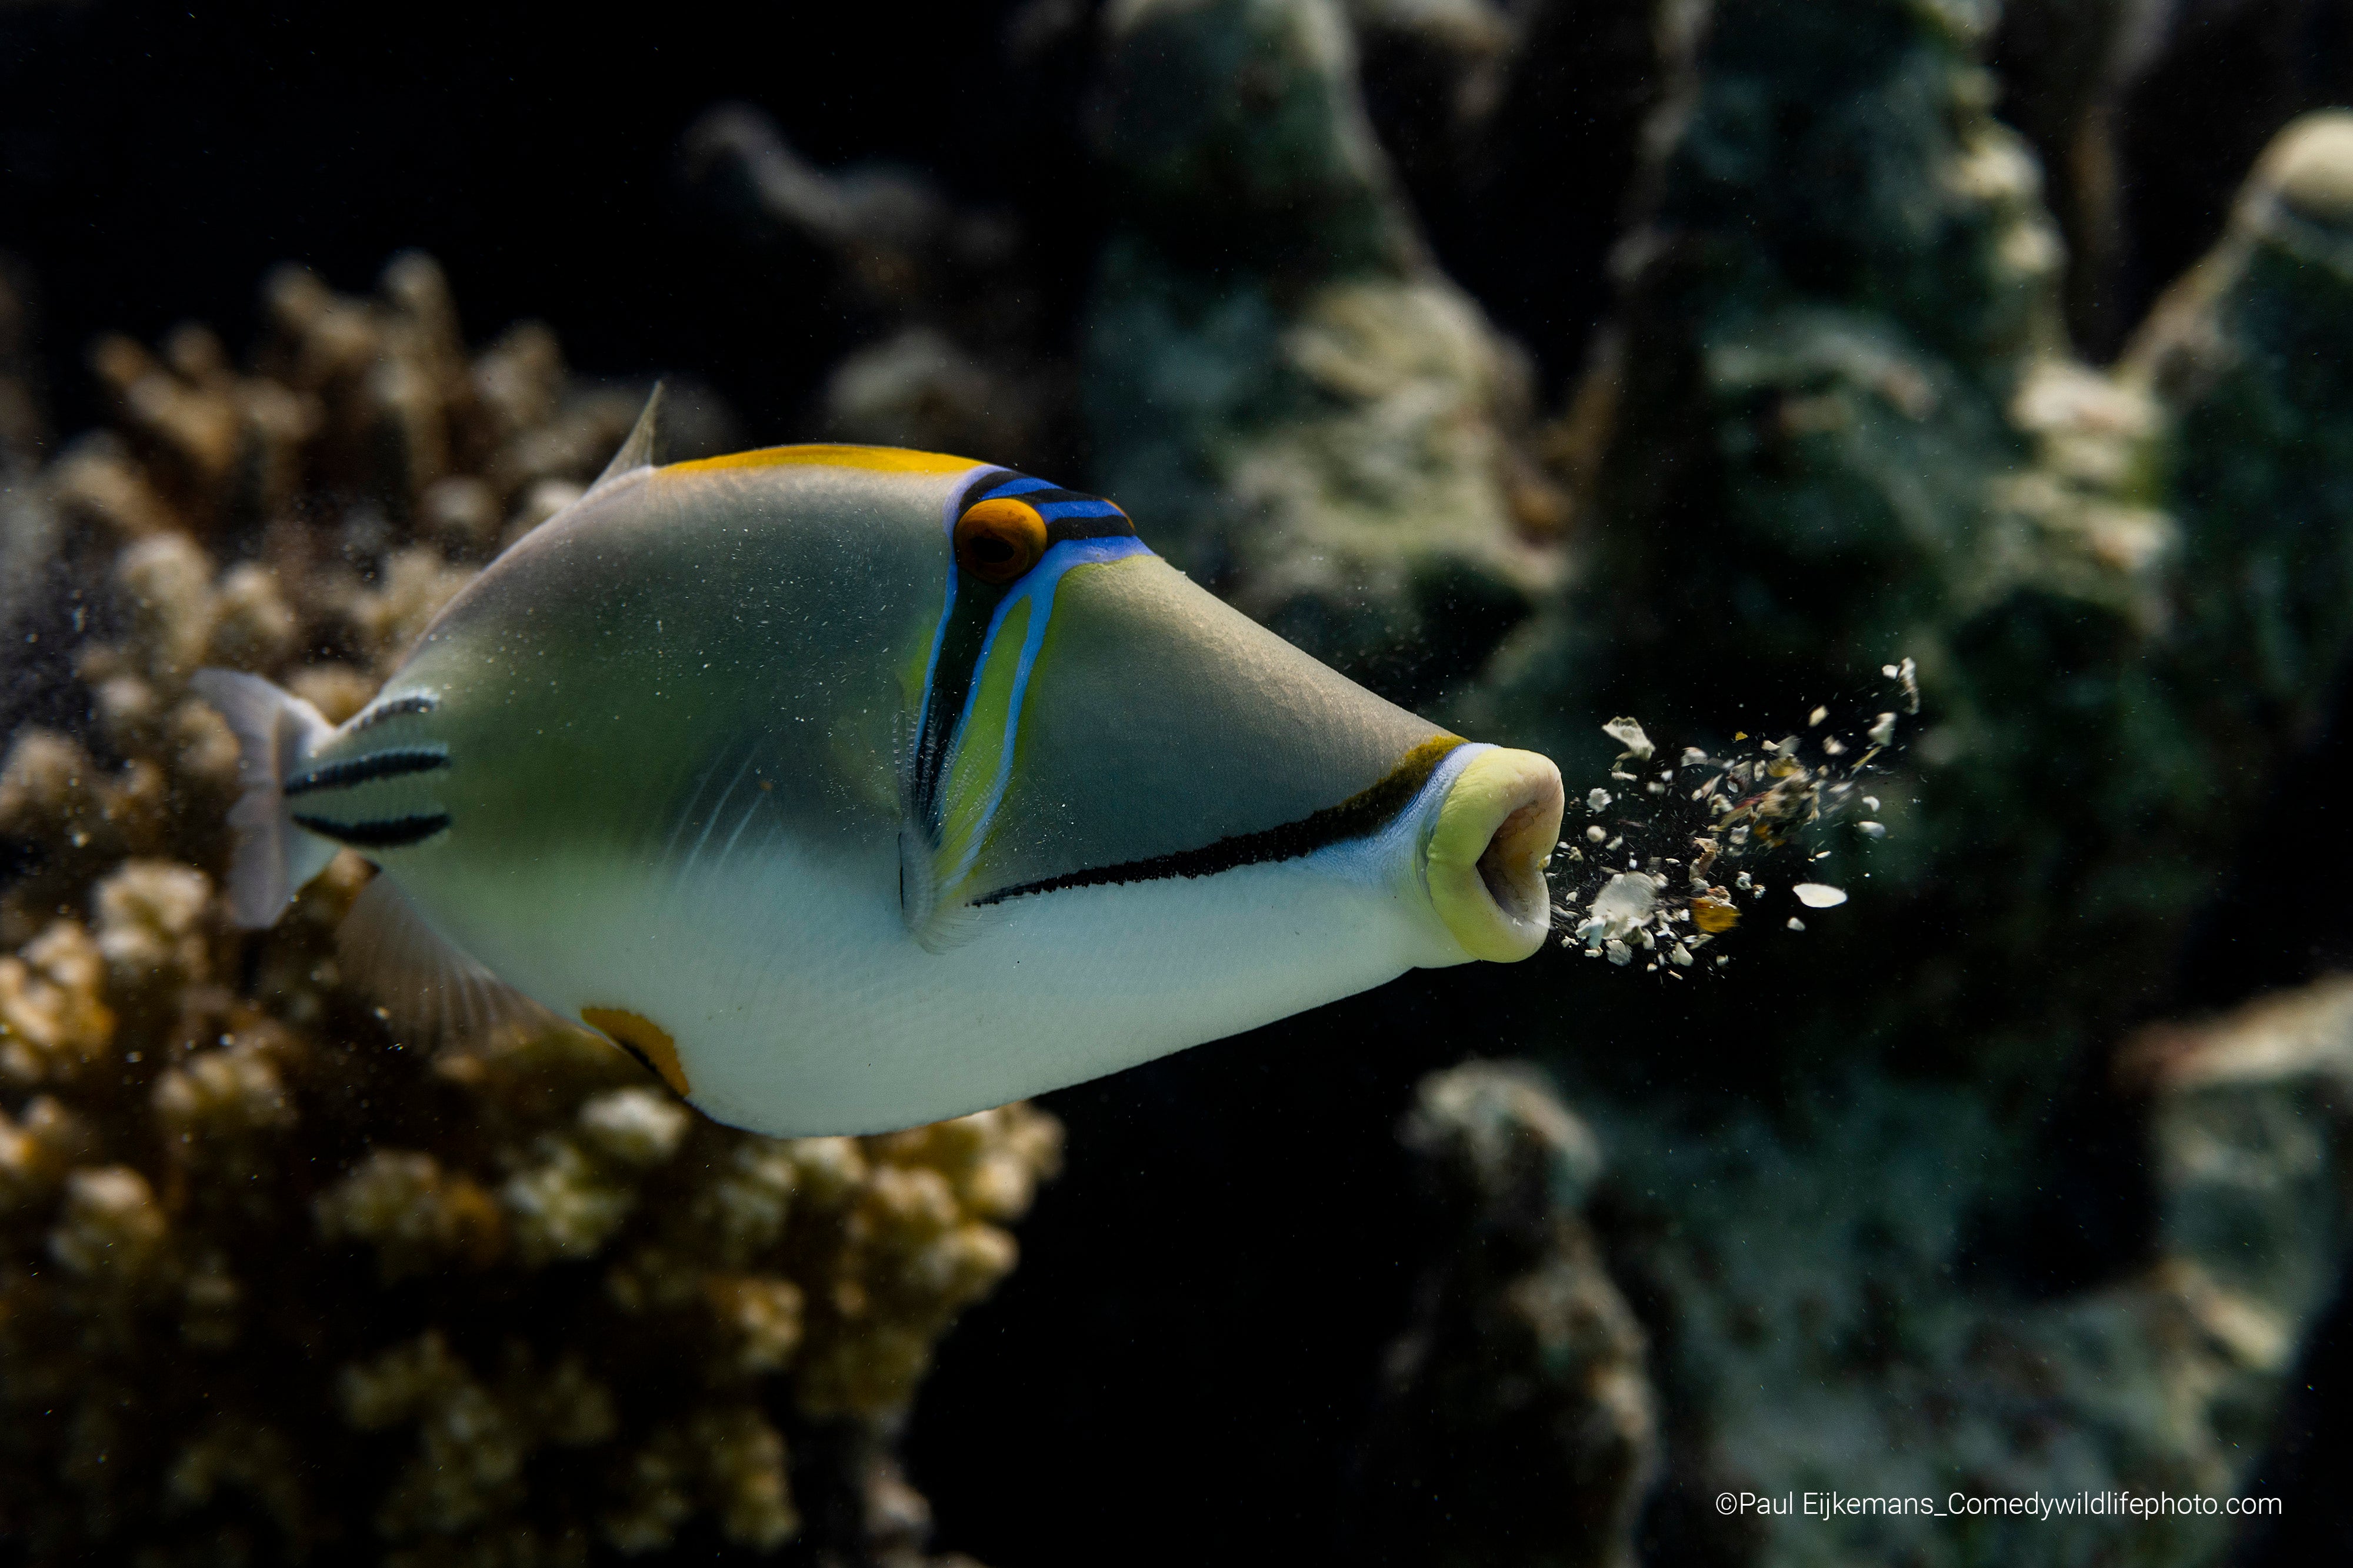 A Picasso triggerfish exhales coral. (Photo: © Paul Eijkemans / Comedywildlifephoto.com.)